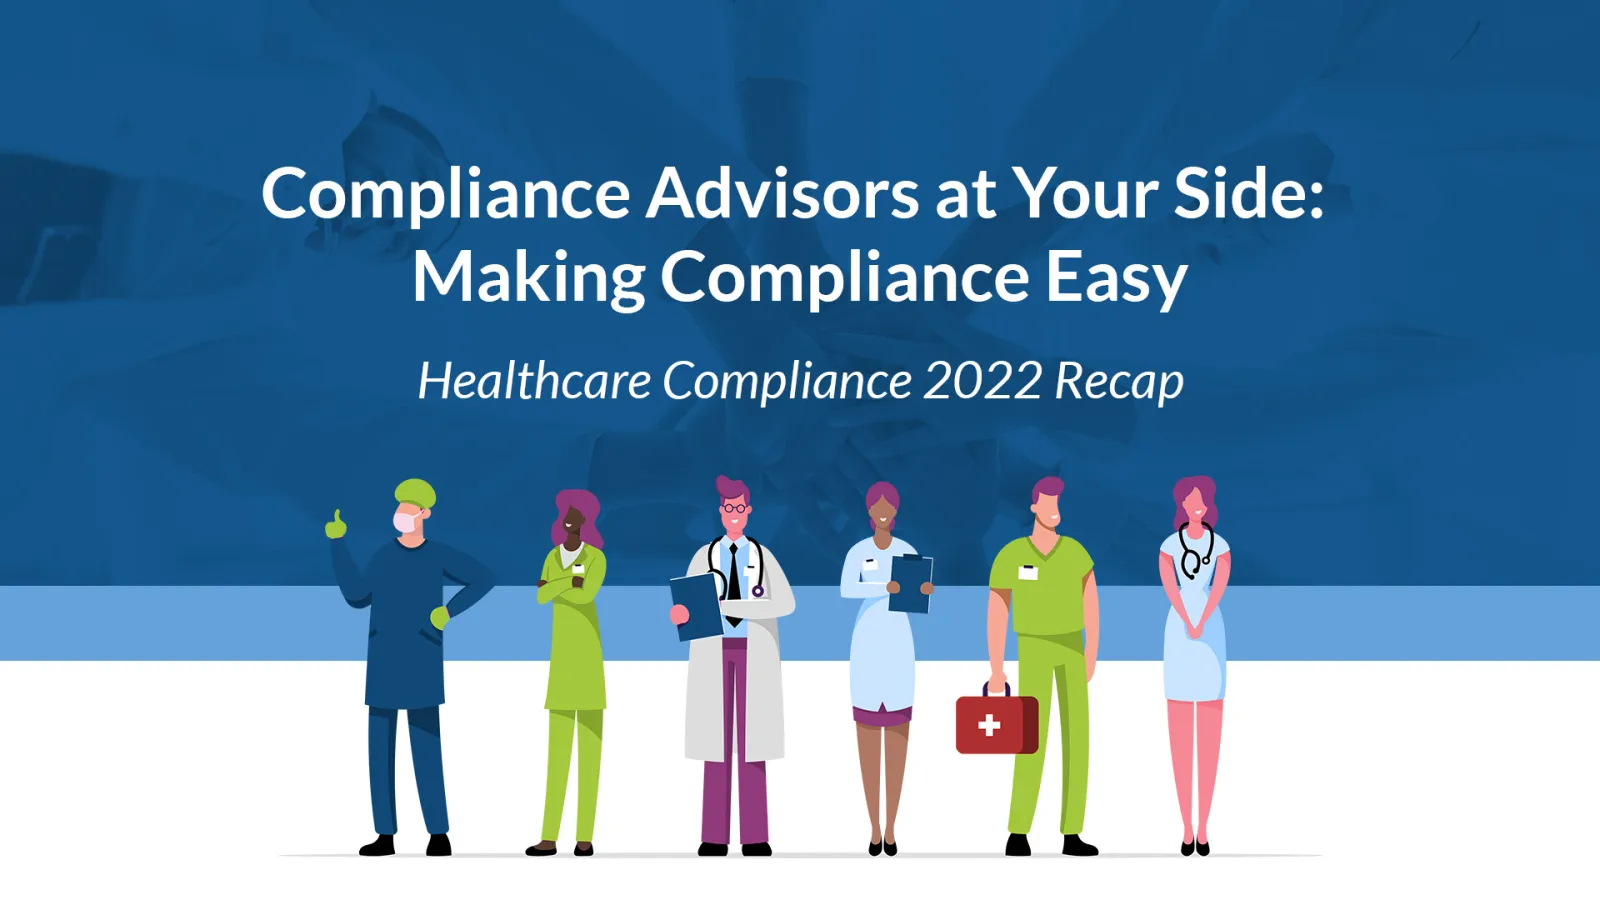 Compliance advisors at your side